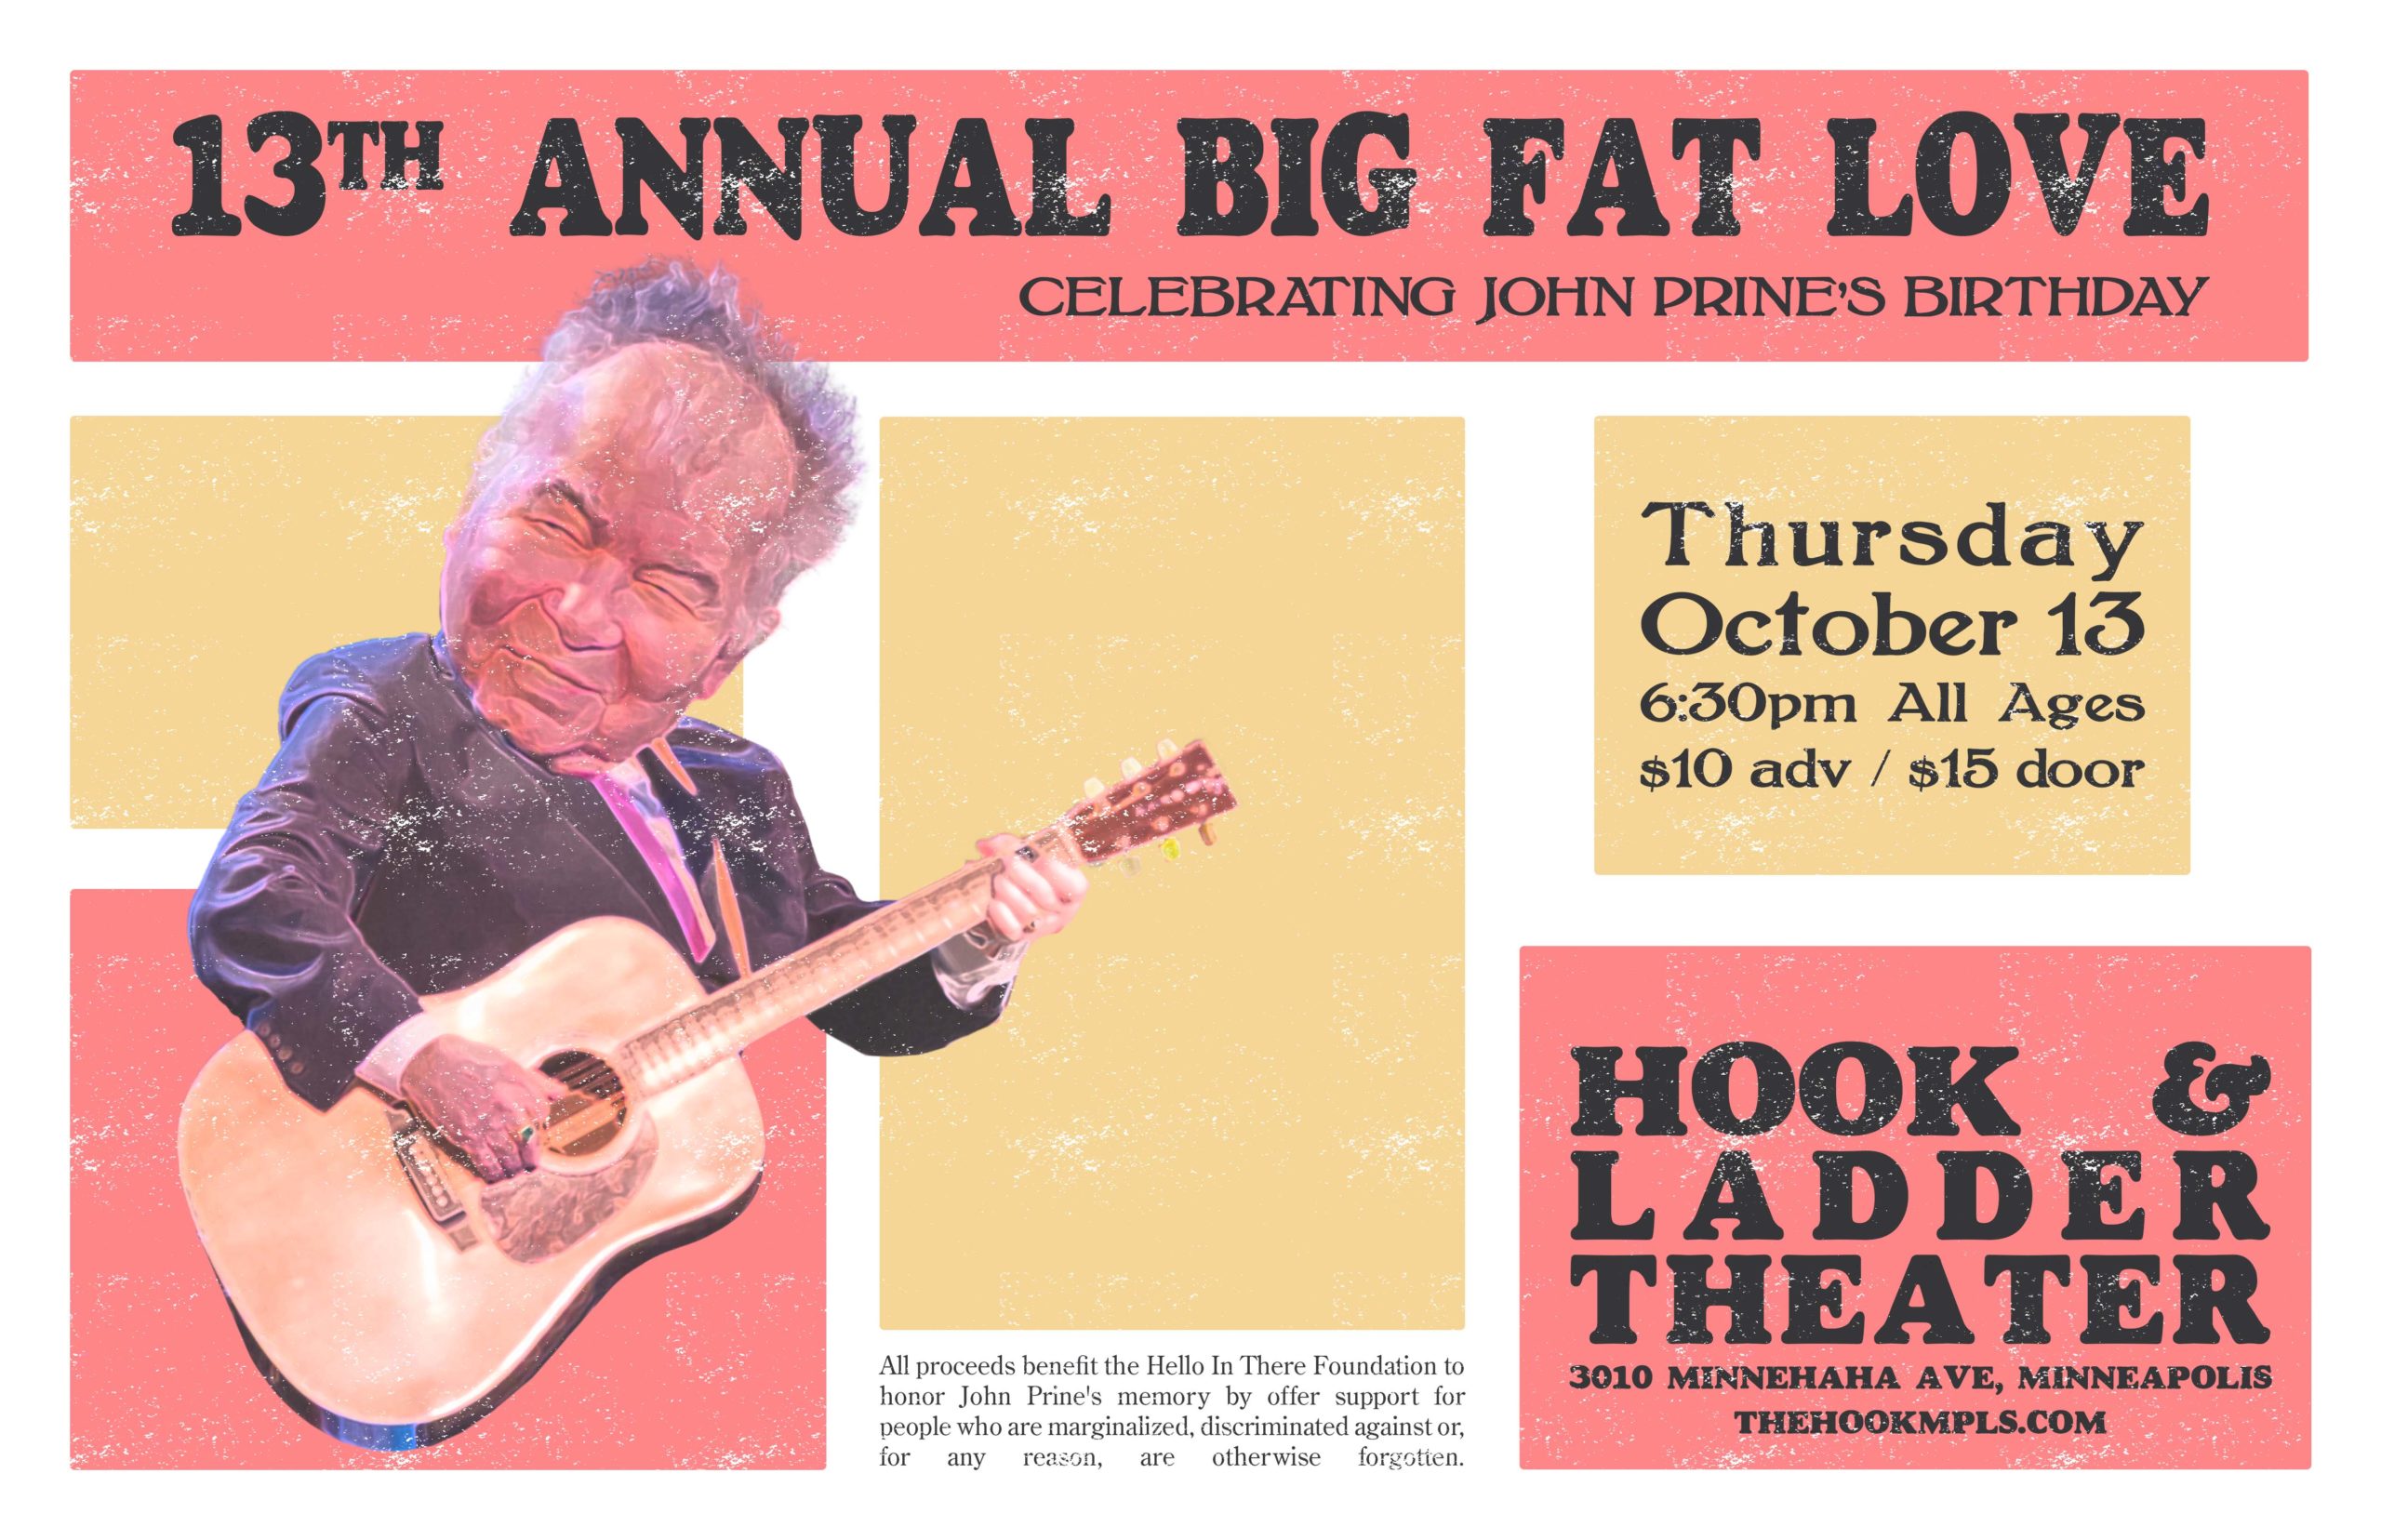 13th Annual Big Fat Love: Celebrating John Prine's Birthday Featuring: • Davina Sowers Lozier (Davina & The Vagabonds)• The Beavers • Mother Banjo • Art Vandalay • Ben Cook-Feltz • Trevor McSpadden • Jaspar Lepak • Zachary Scot Johnson and more! Thursday, October 13, 2022 The Hook and Ladder Theater Doors 6:30pm :: Music 7:00pm :: 21+ GA: $10 Advance :: $15 Day of Show Seating Available On A First-come First-served Basis.